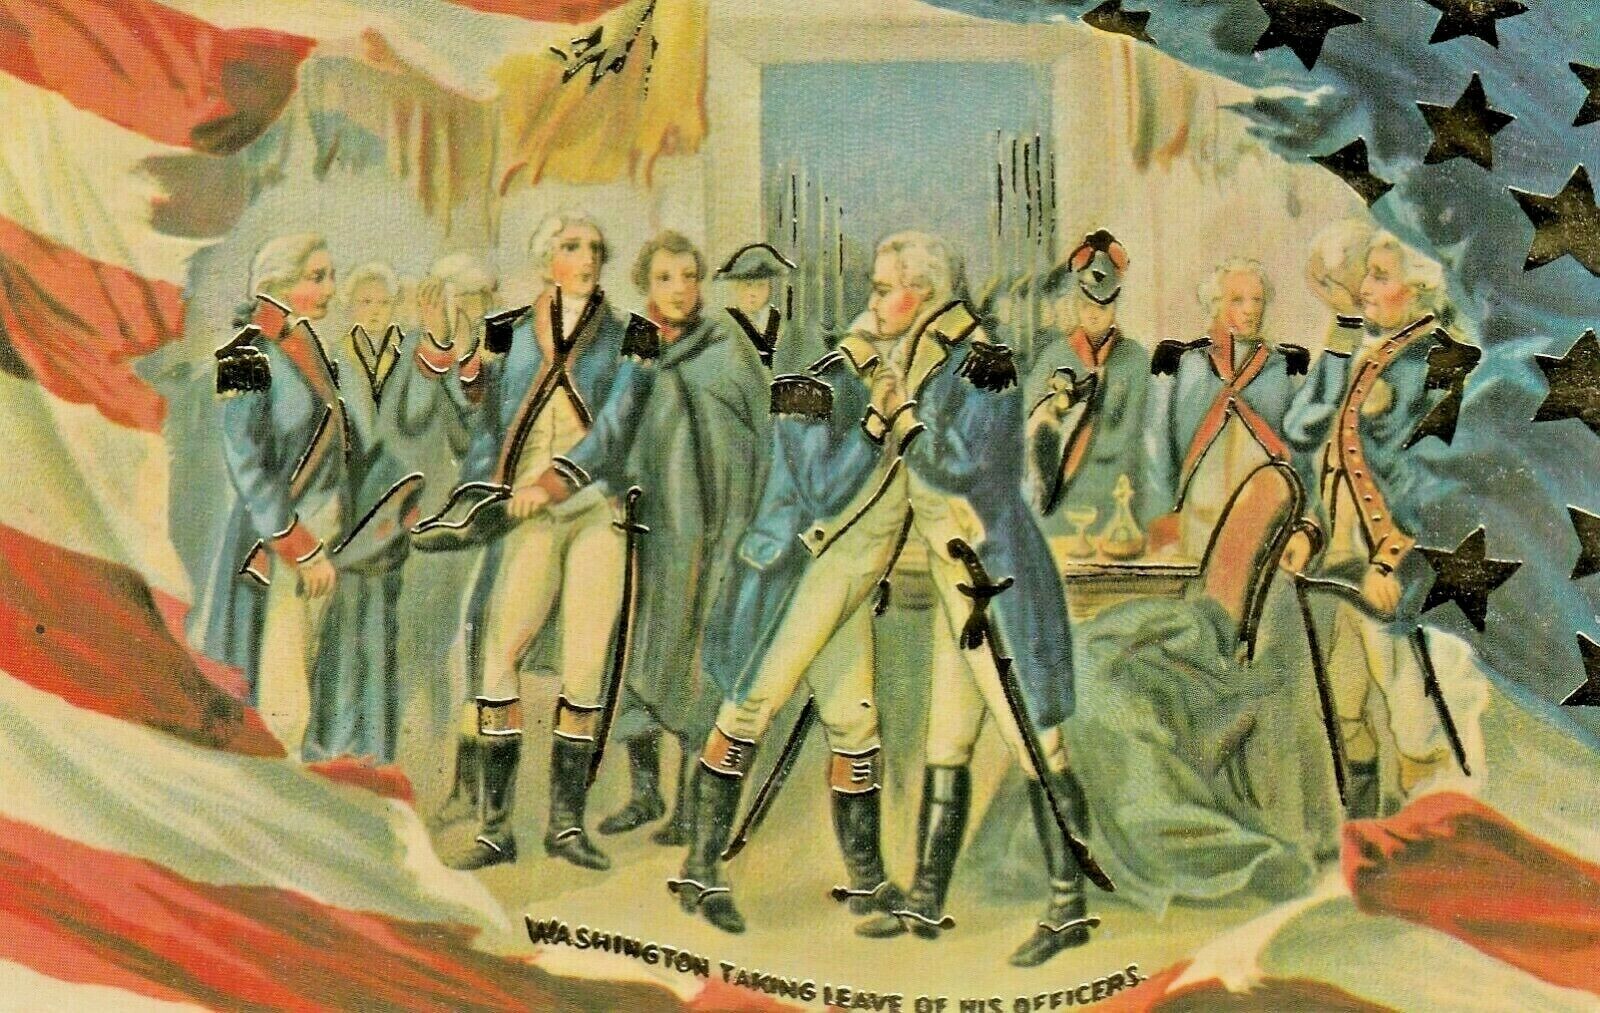 Reproduction Patriotic Postcard WASHINGTON TAKING LEAVE OF HIS OFFICERS 